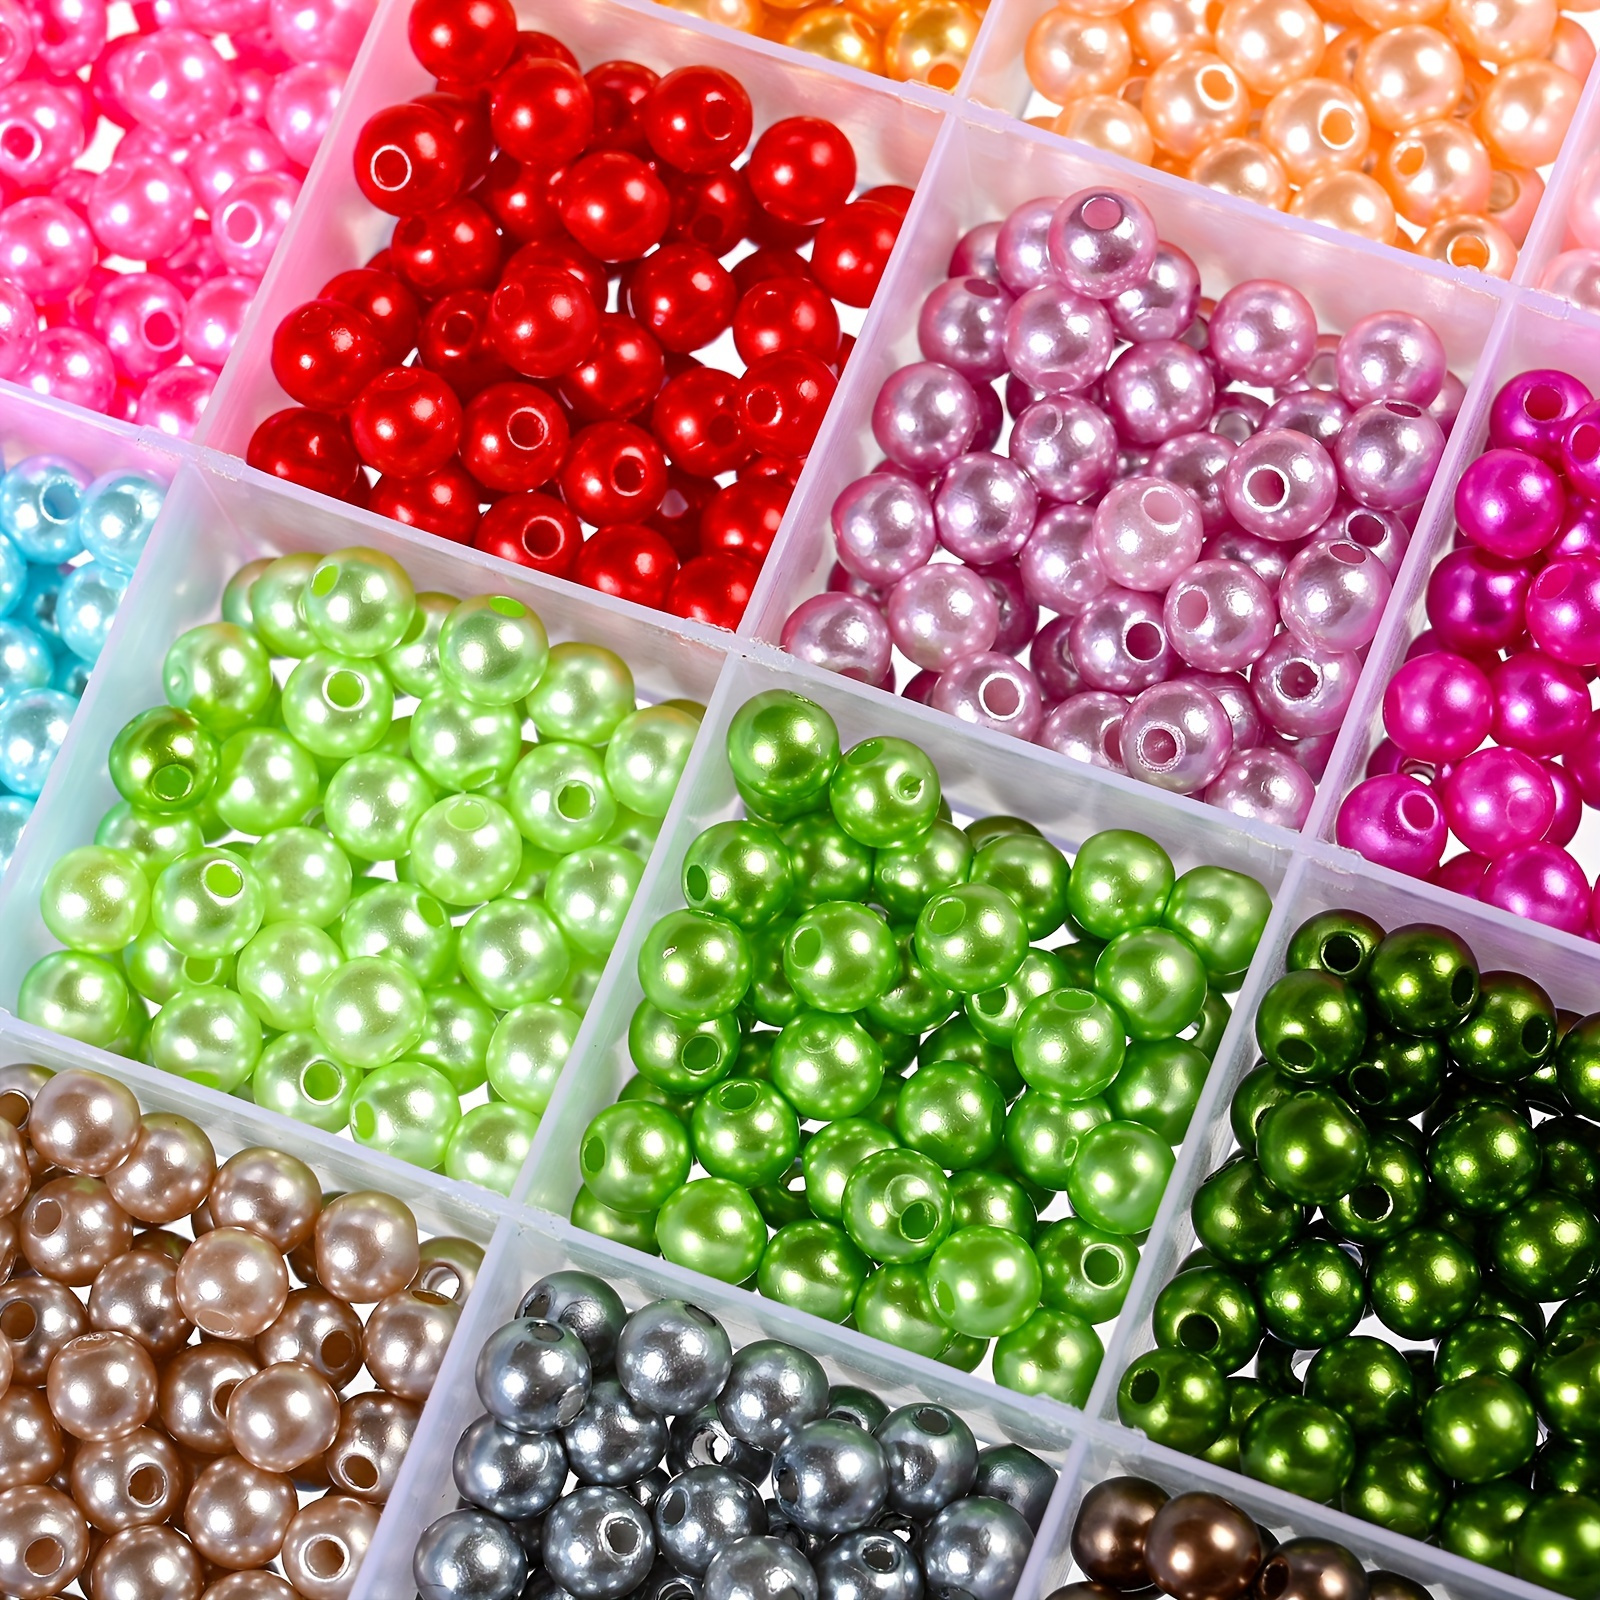 1960PCS Pearl Beads, 6mm 28 Colors Multicolor Pearl Beads Loose Pearls For  Crafts With Holes For Jewelry Making, Small Pearl Filler Beads For Crafting  Bracelet Necklace Earrings